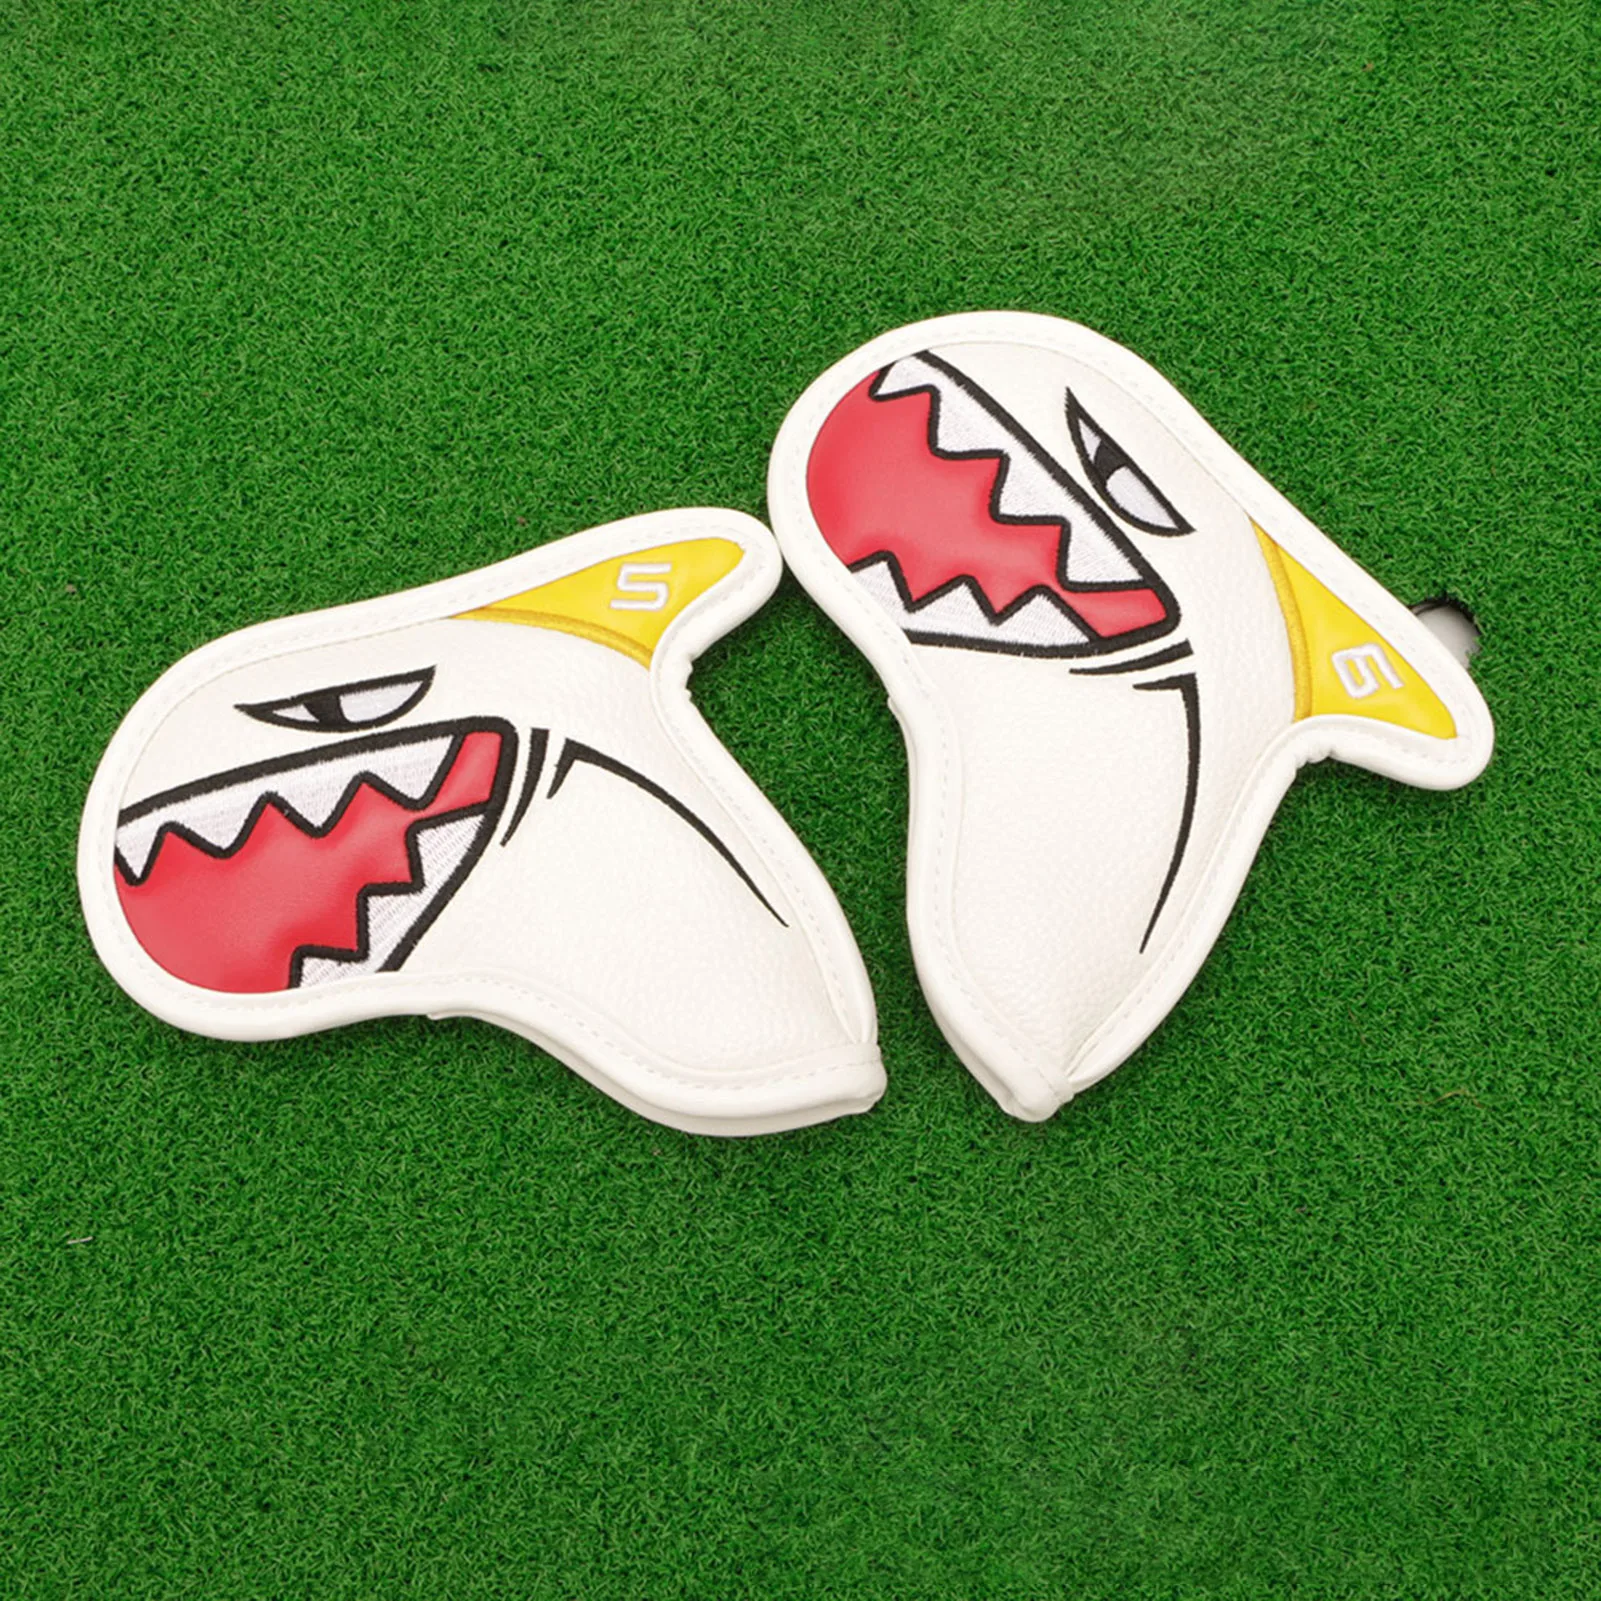 

Golf Club Head Cover Set 9Pcs Universal Golf Iron Headcover Cute Sharks Design With Number Protective Golf Accessories For Iron